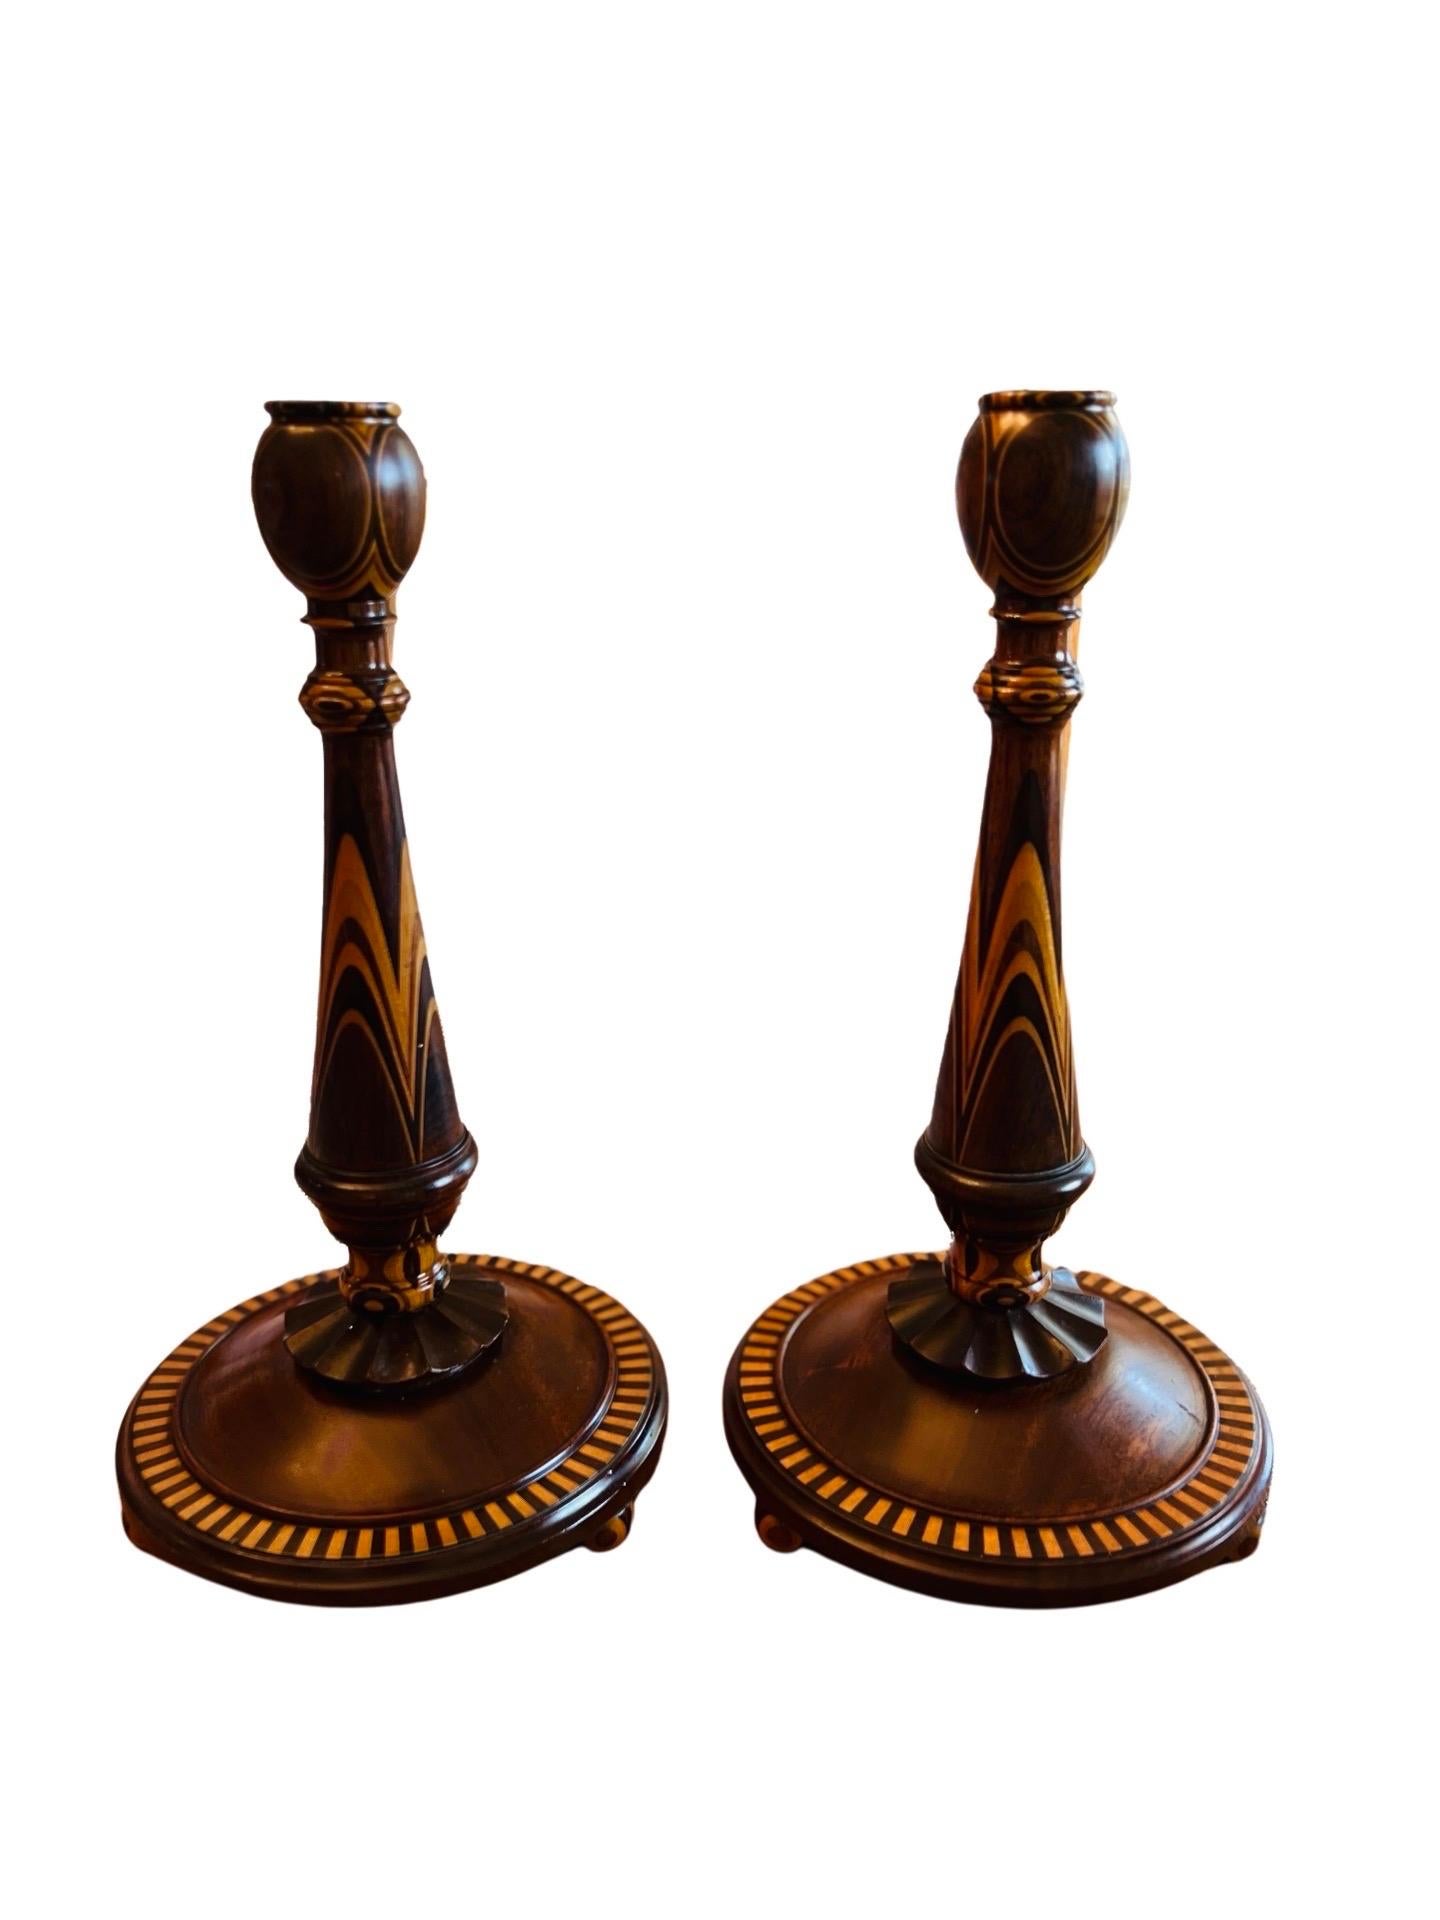 Fine American Turned Walnut & Mixed Marquetry Wood Candlesticks circa 1925

Each candlestick is finely crafted in a mix of walnut, mahogany, oak and other quality woods. Sculptured with inlay across the surface, a scalloped skirt and terminating